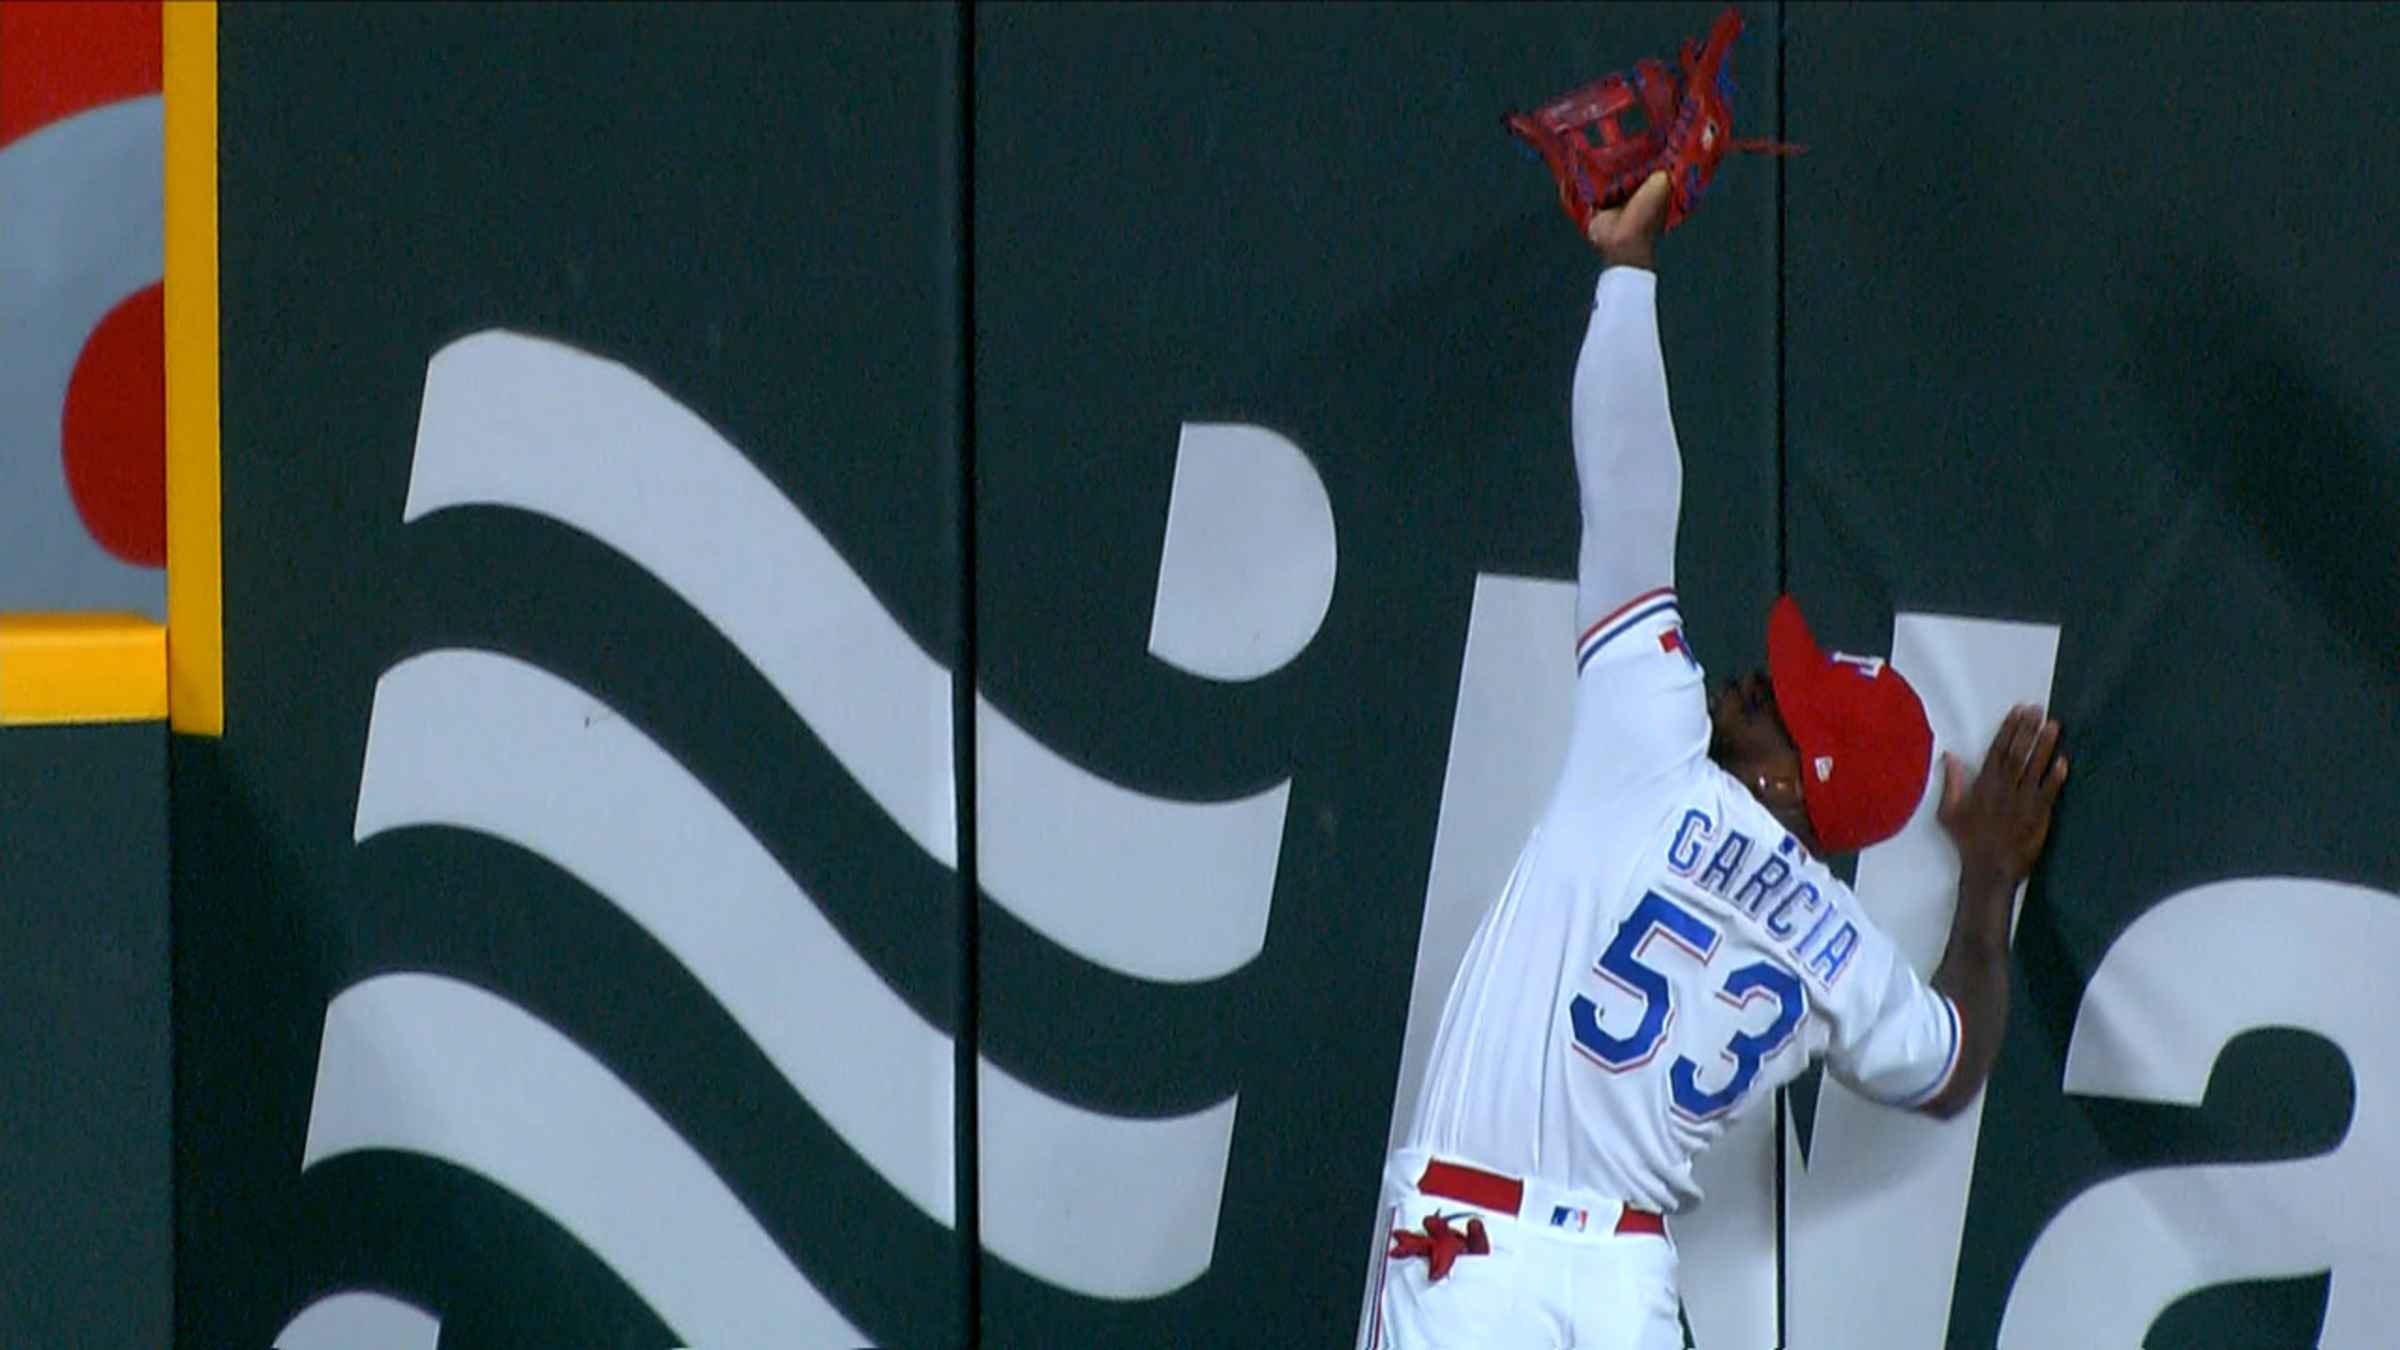 Adolis Garcia makes two amazing catches in All-Star Game